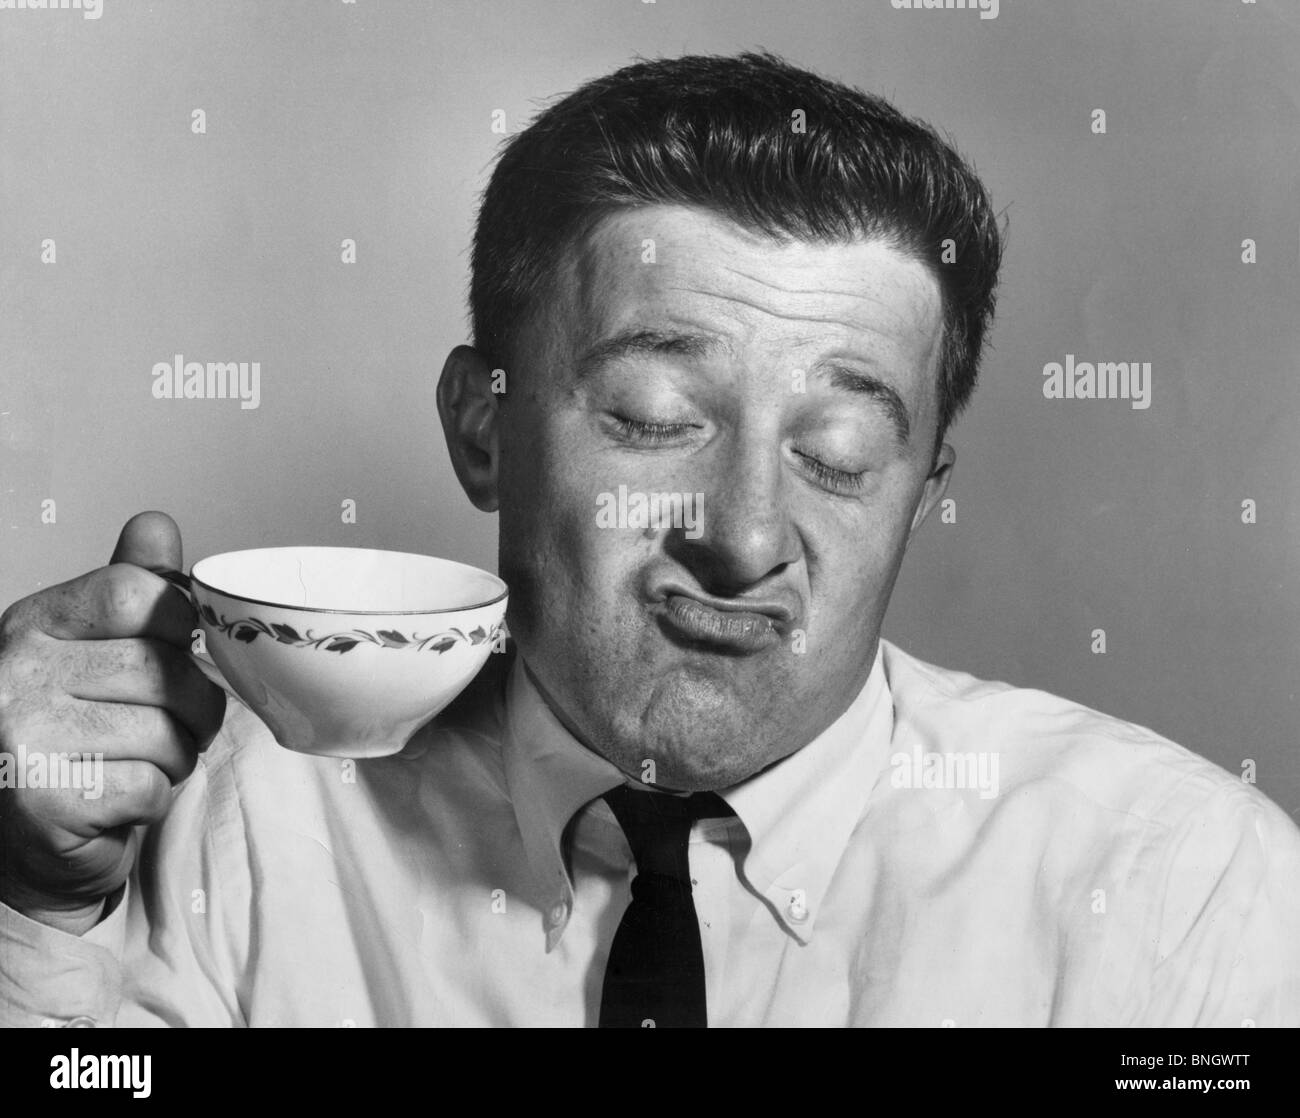 Mature man holding tea cup and making a face Stock Photo